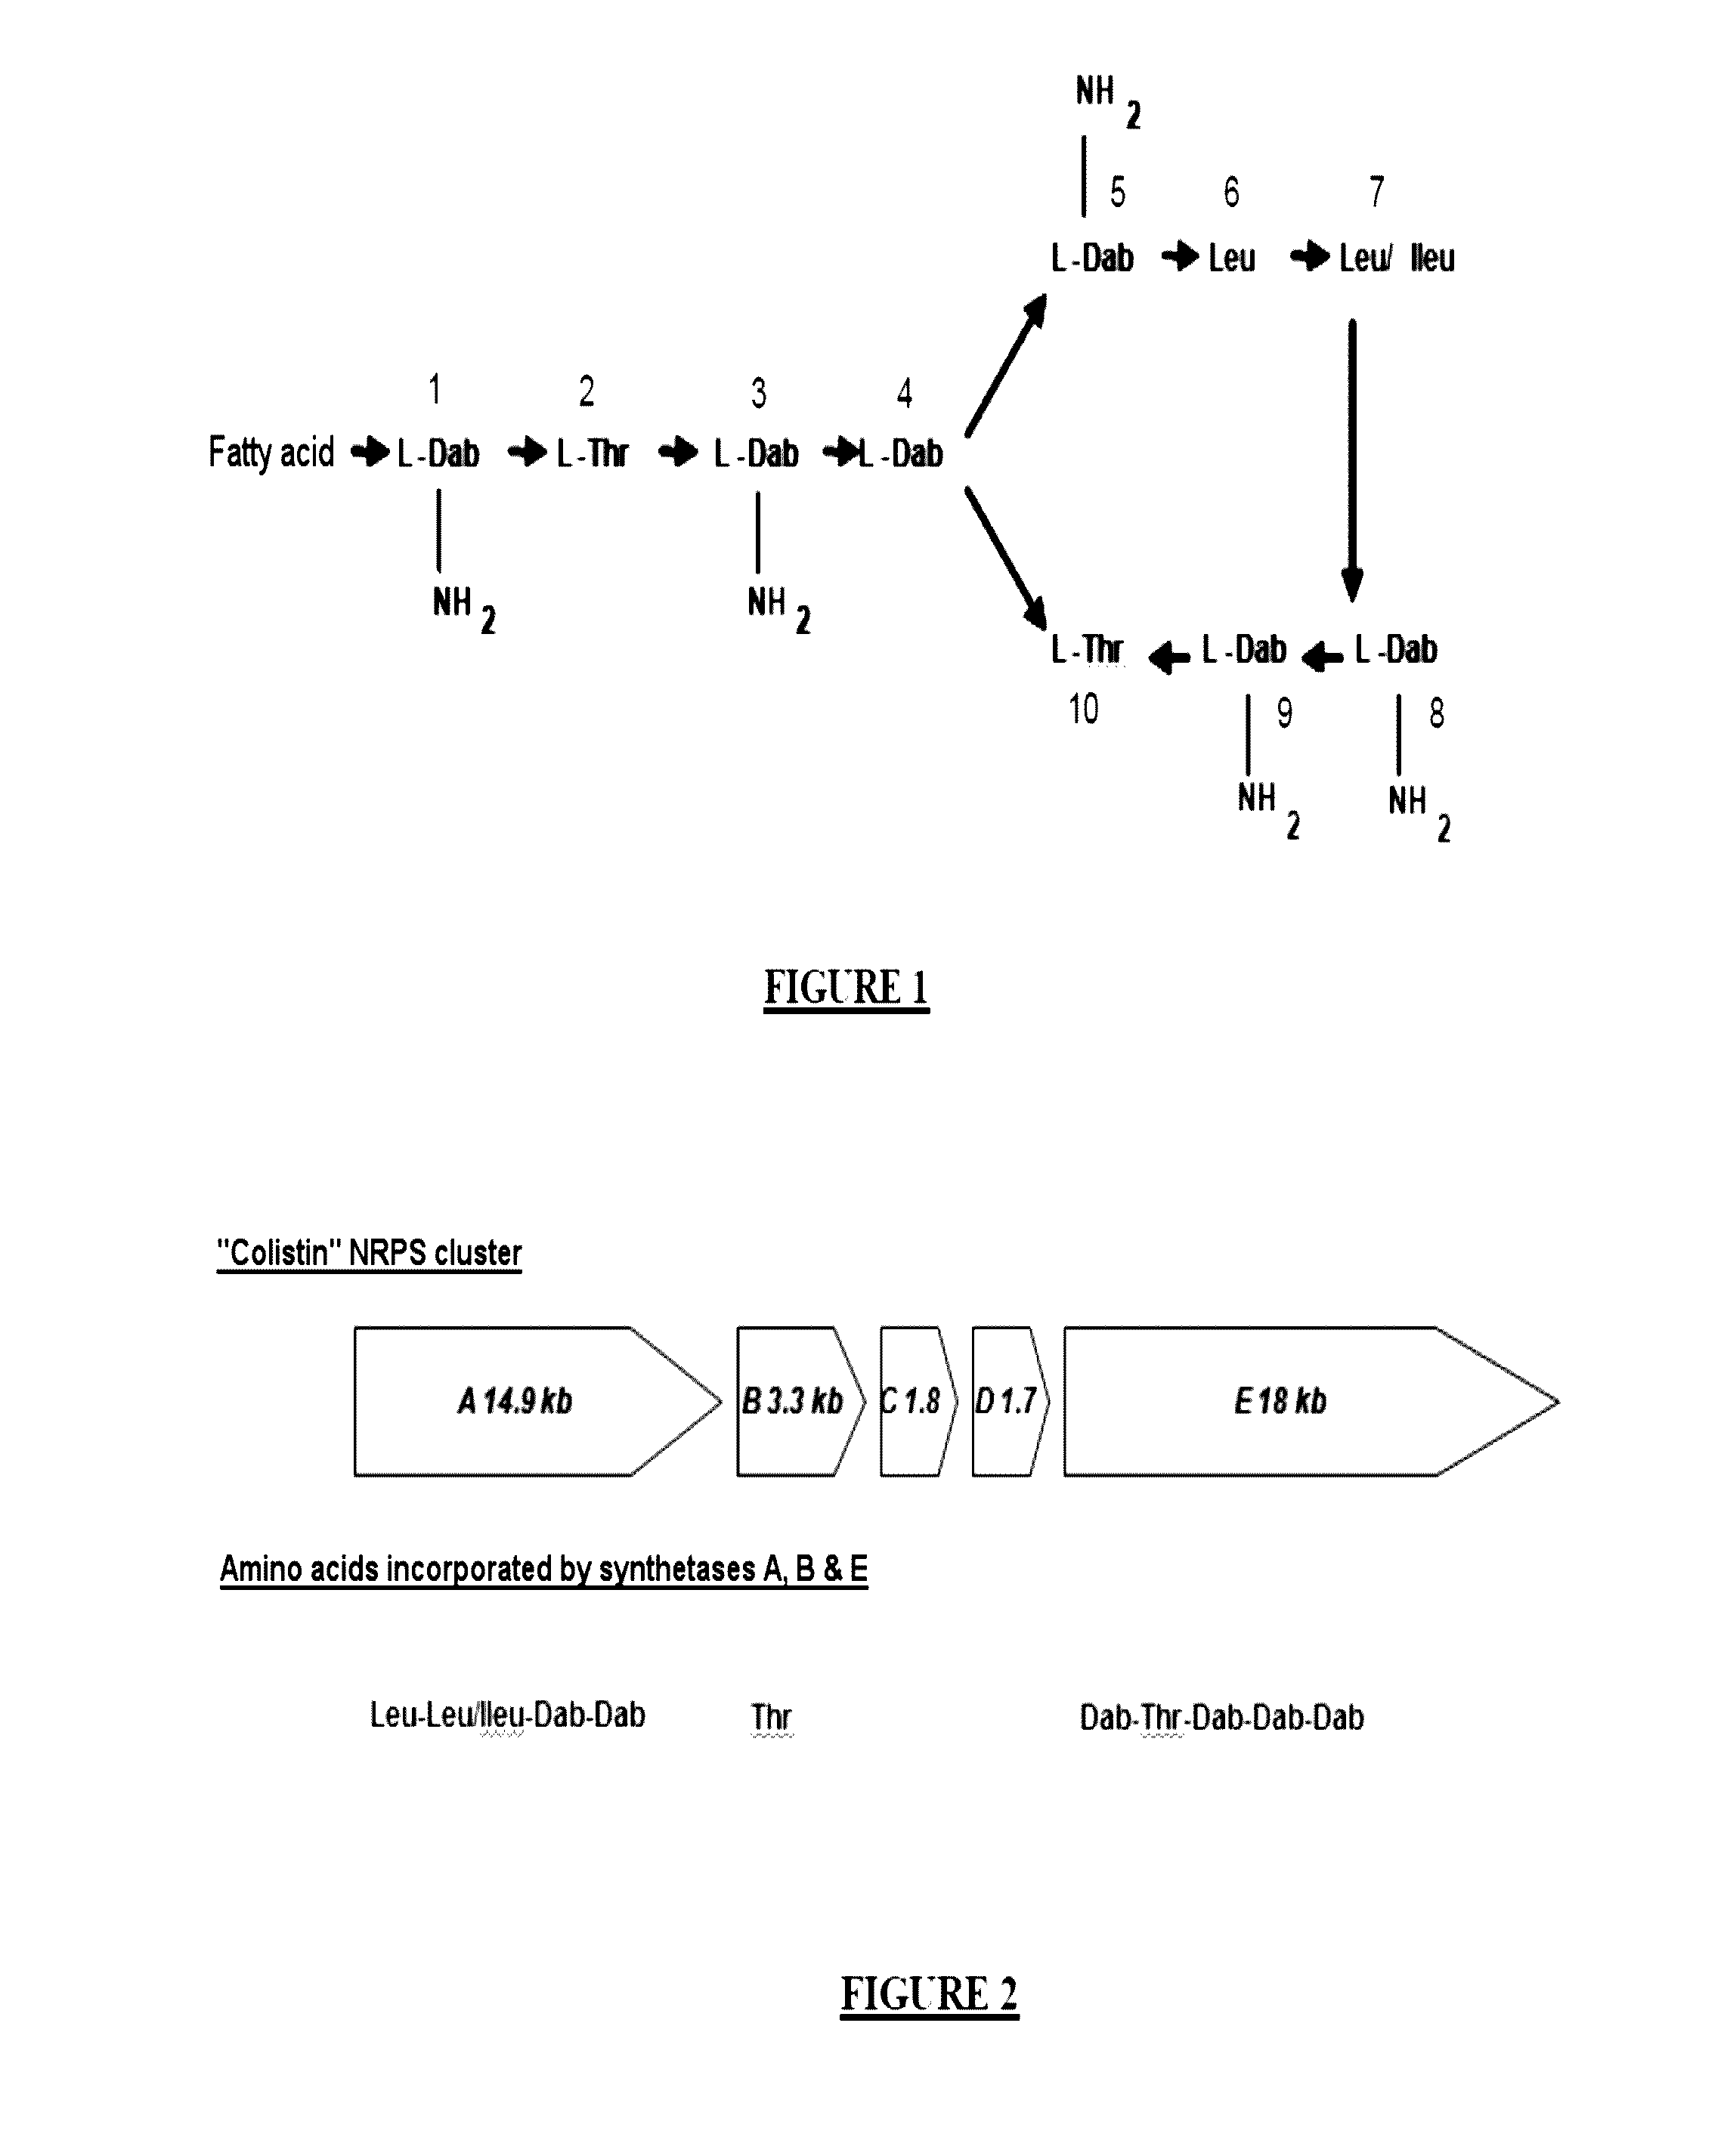 Colistin Synthetases and Corresponding Gene Cluster